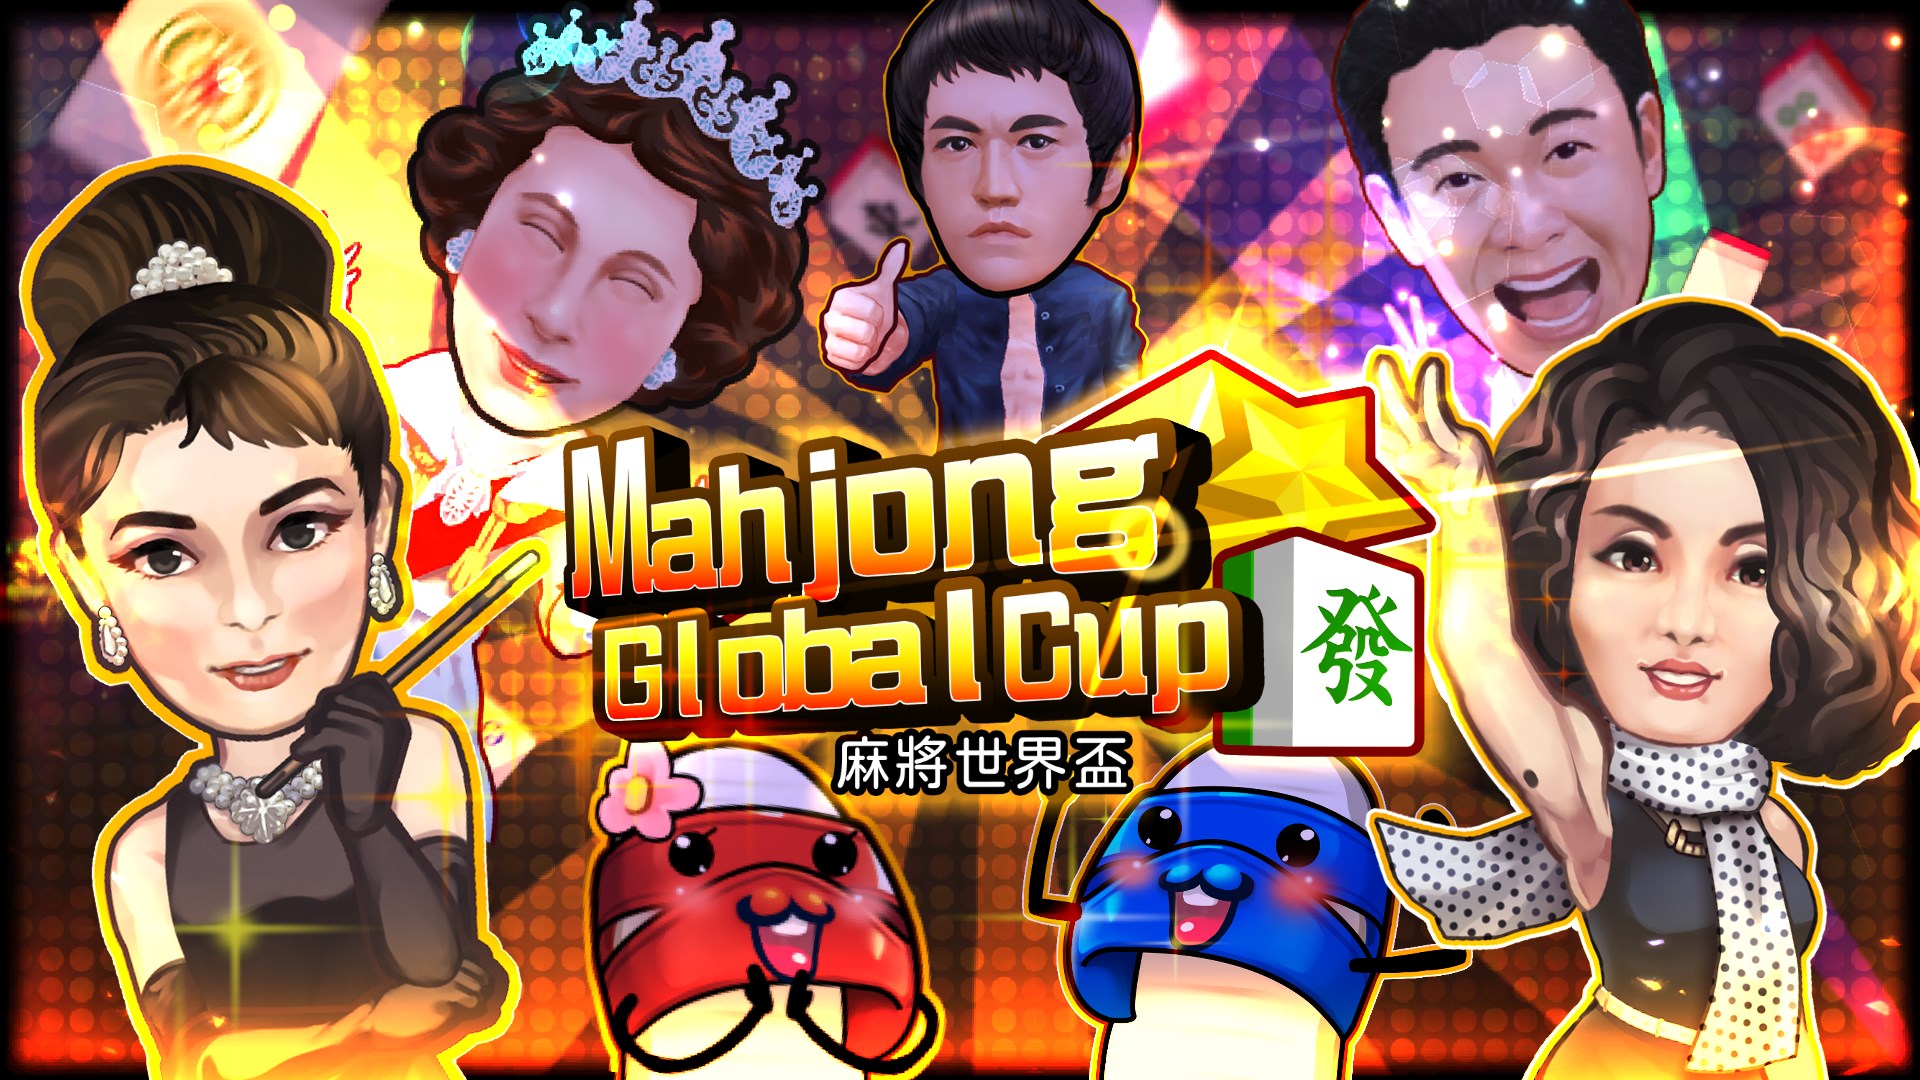 Mahjong Multiplayer Online Free Gifts & Merchandise for Sale